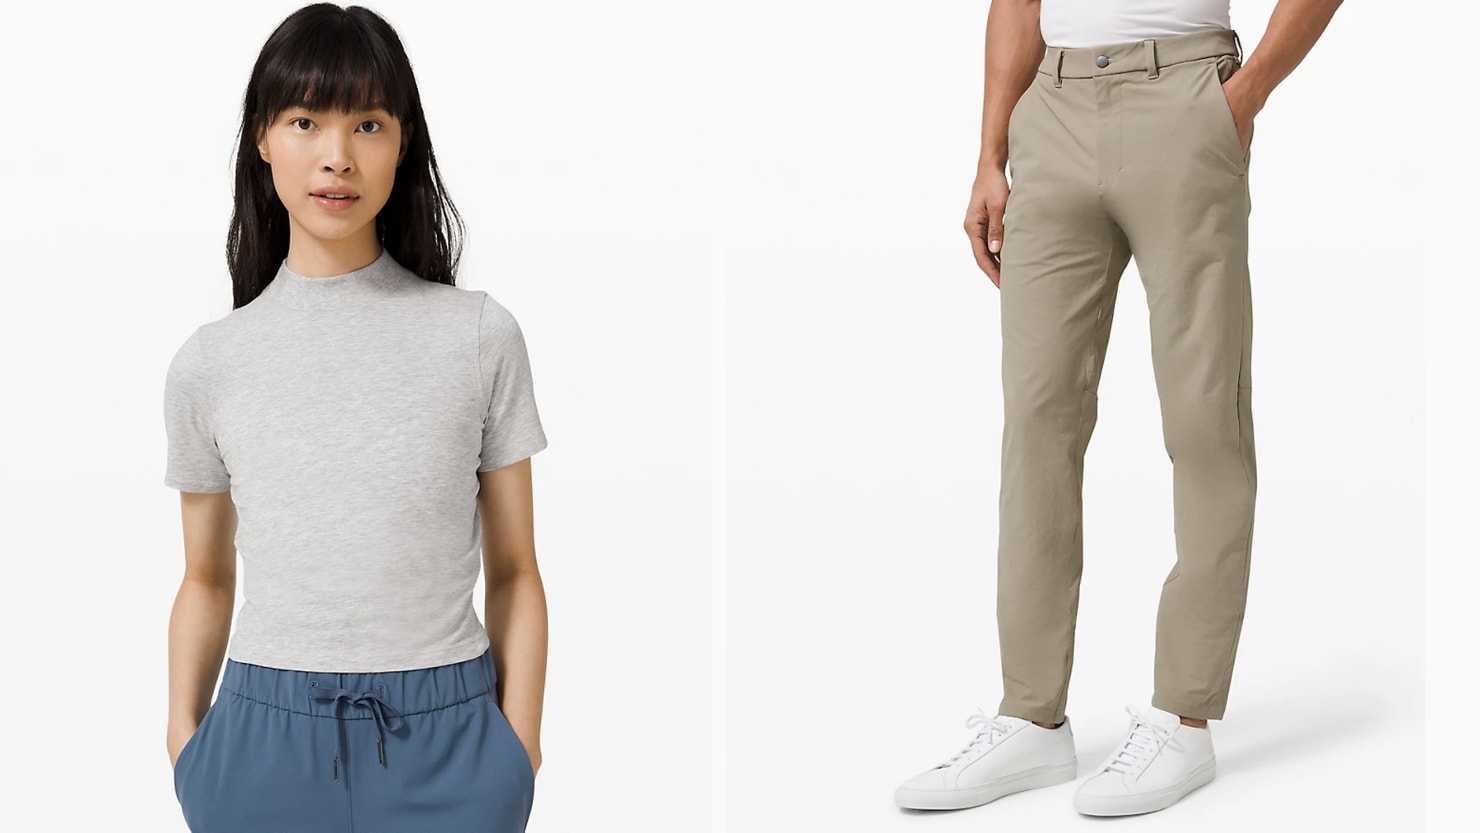 lululemon We Made Too Much restock: 6 products you should buy this week 